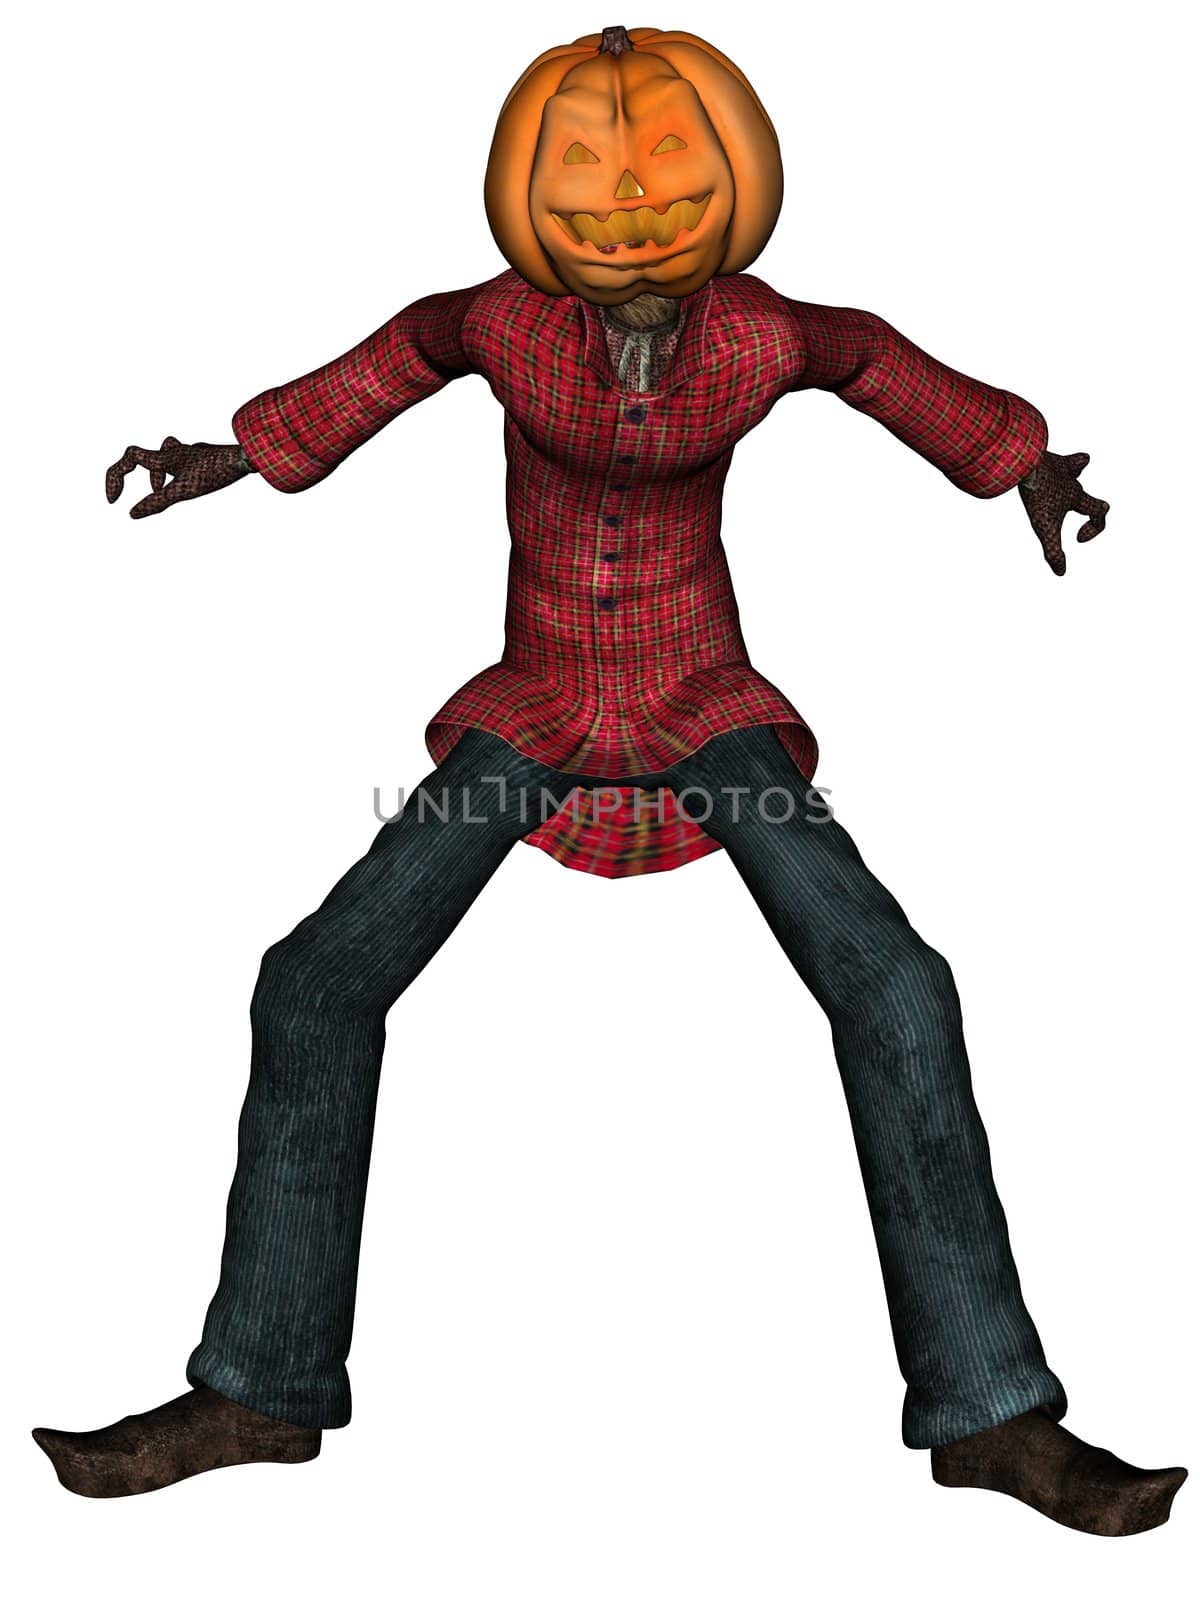 3D rendered Helloween man with pumpkin head isolated on white background